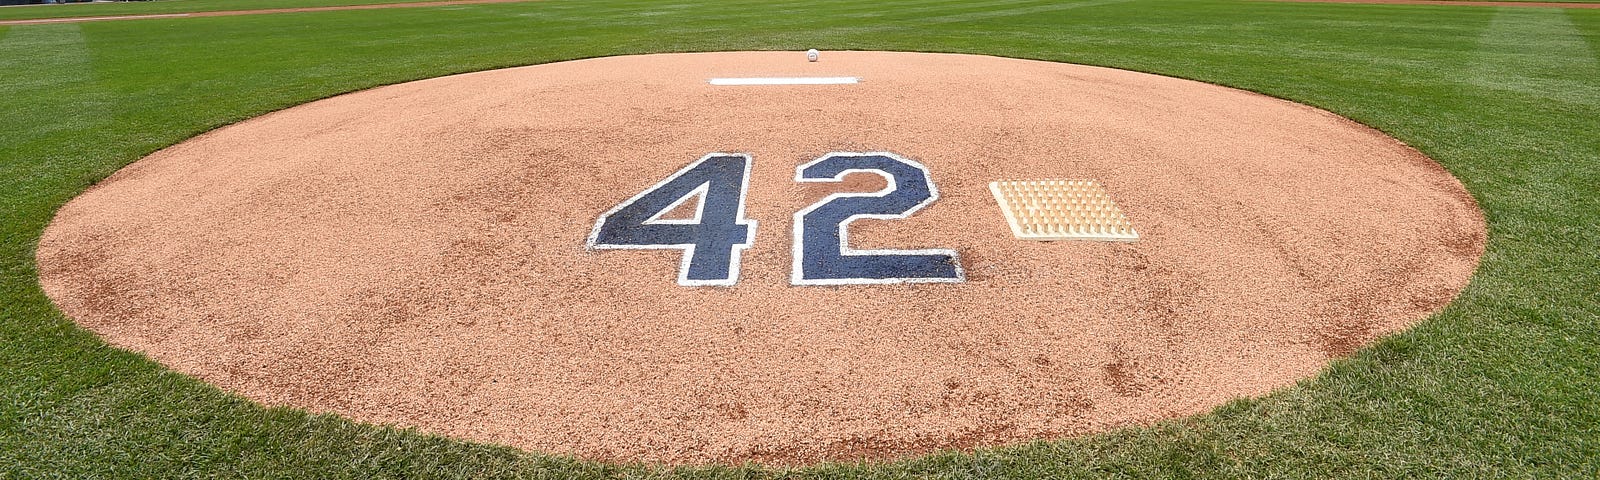 Dodgers celebrate Jackie Robinson Day with the Hall of Famer's family, by  Rowan Kavner